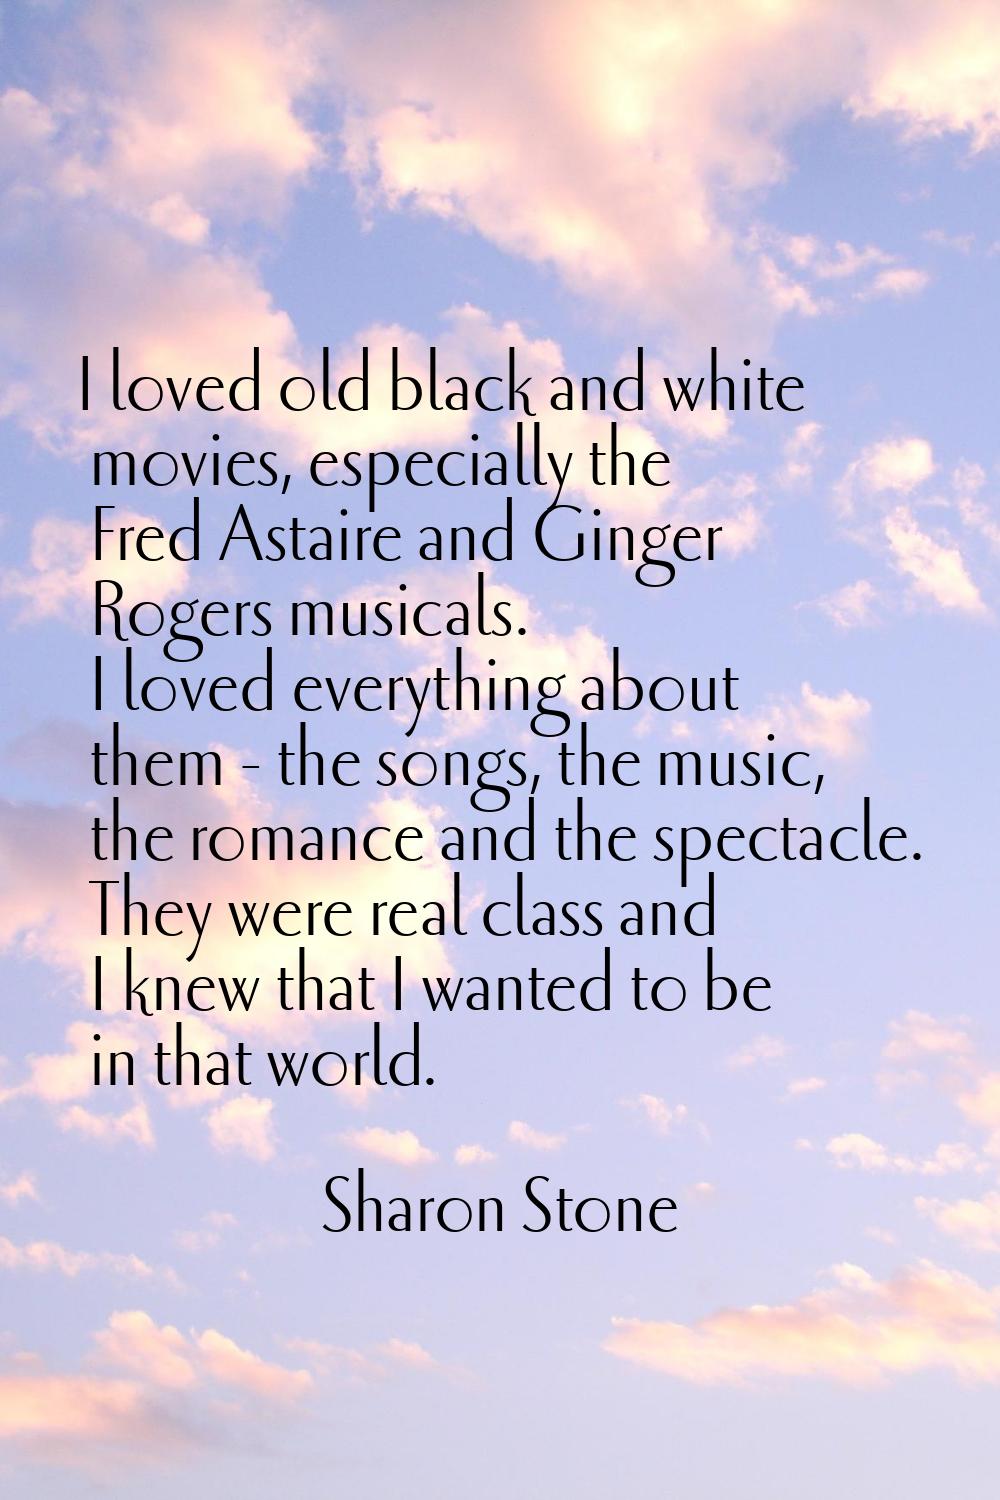 I loved old black and white movies, especially the Fred Astaire and Ginger Rogers musicals. I loved